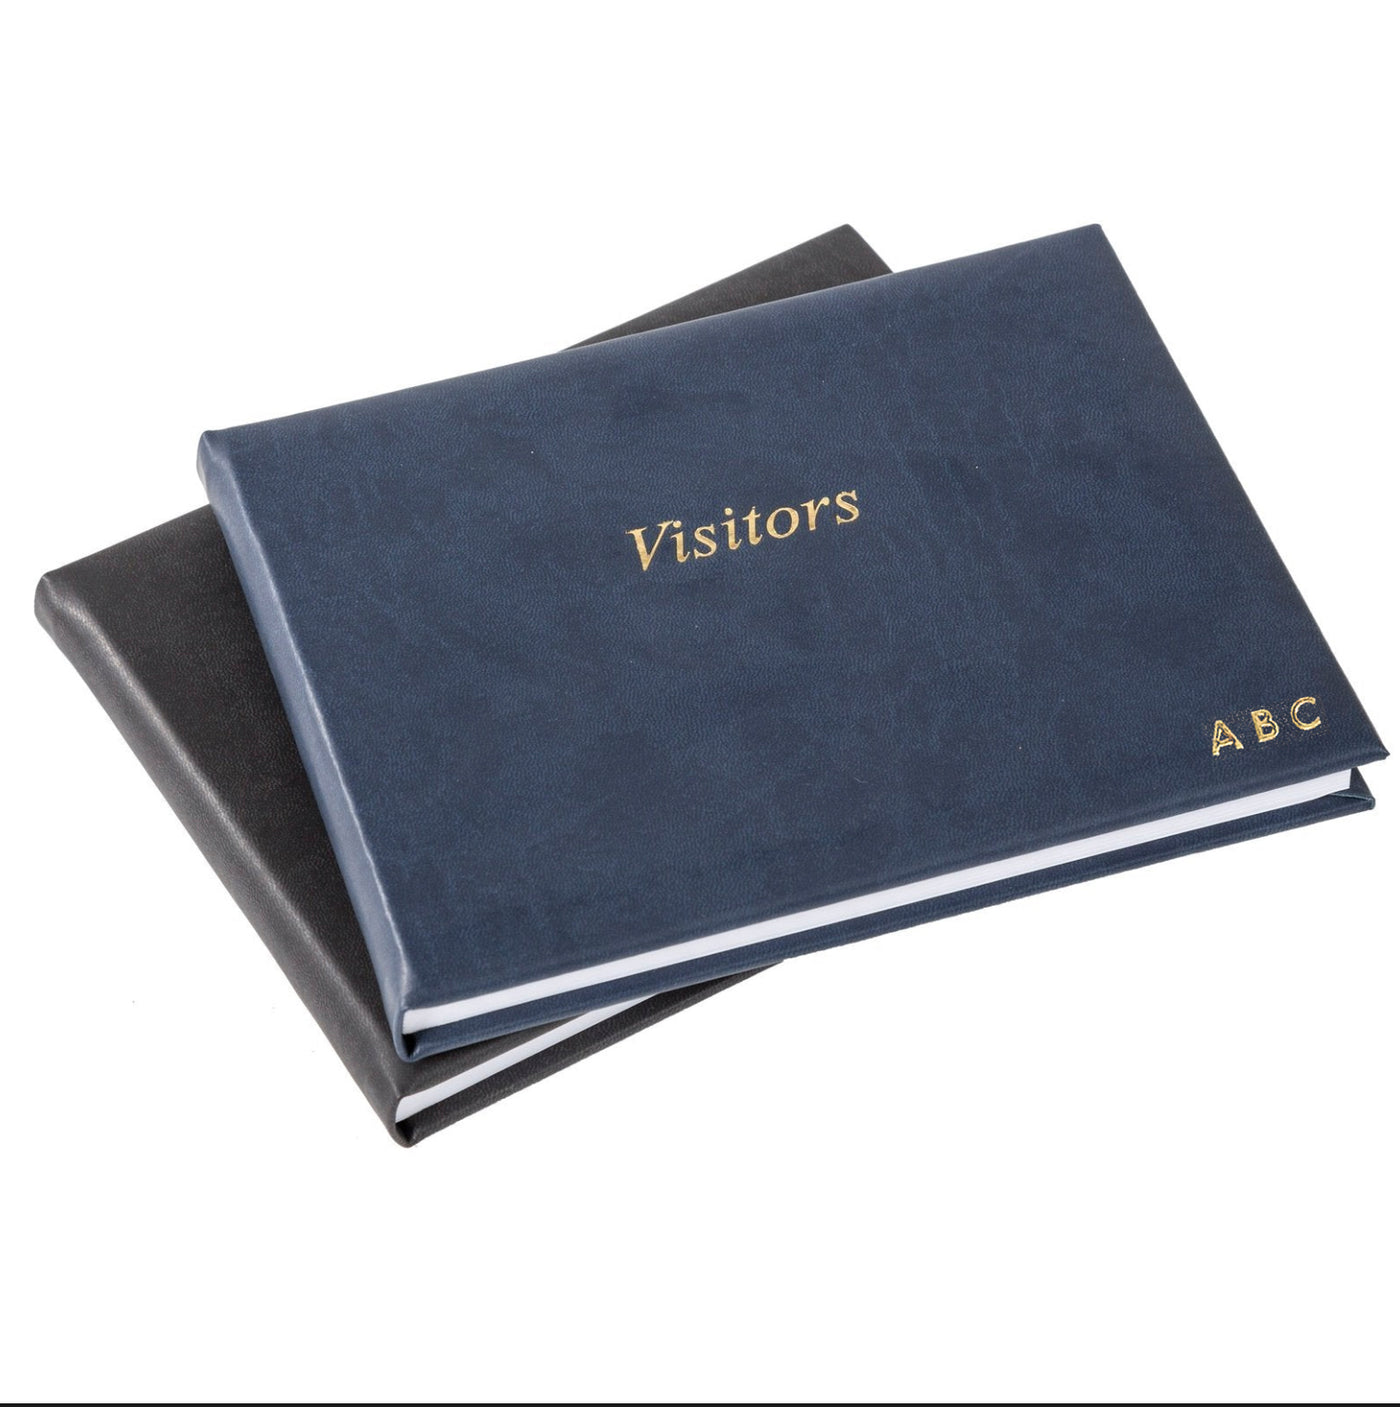 Charcoal Small Visitors Book (Embossed Front)